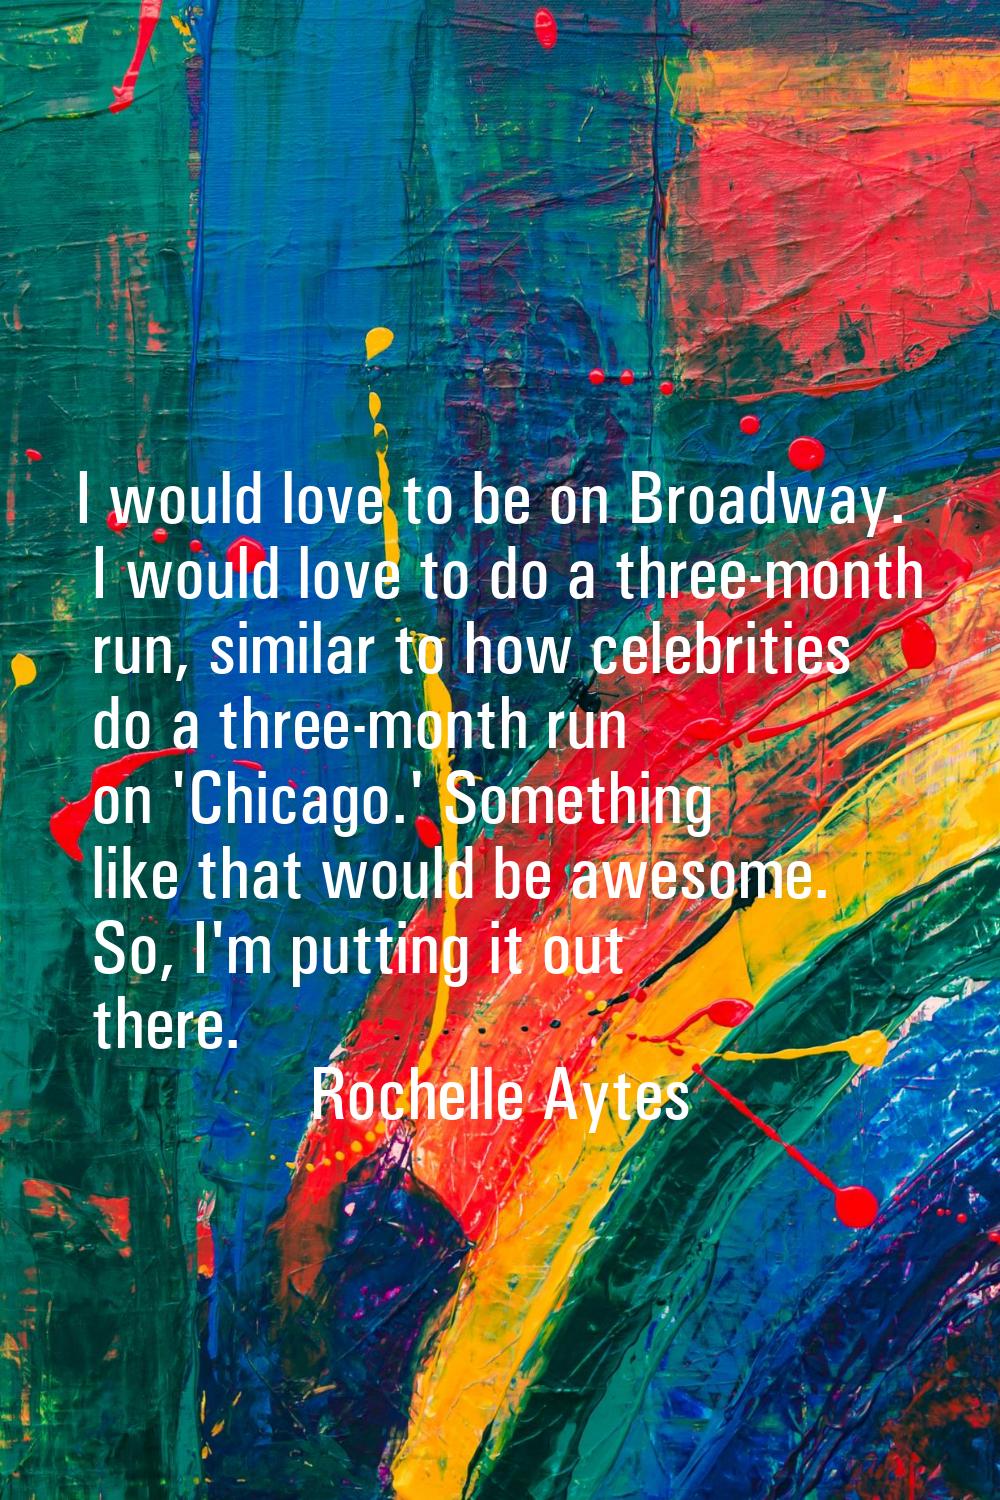 I would love to be on Broadway. I would love to do a three-month run, similar to how celebrities do